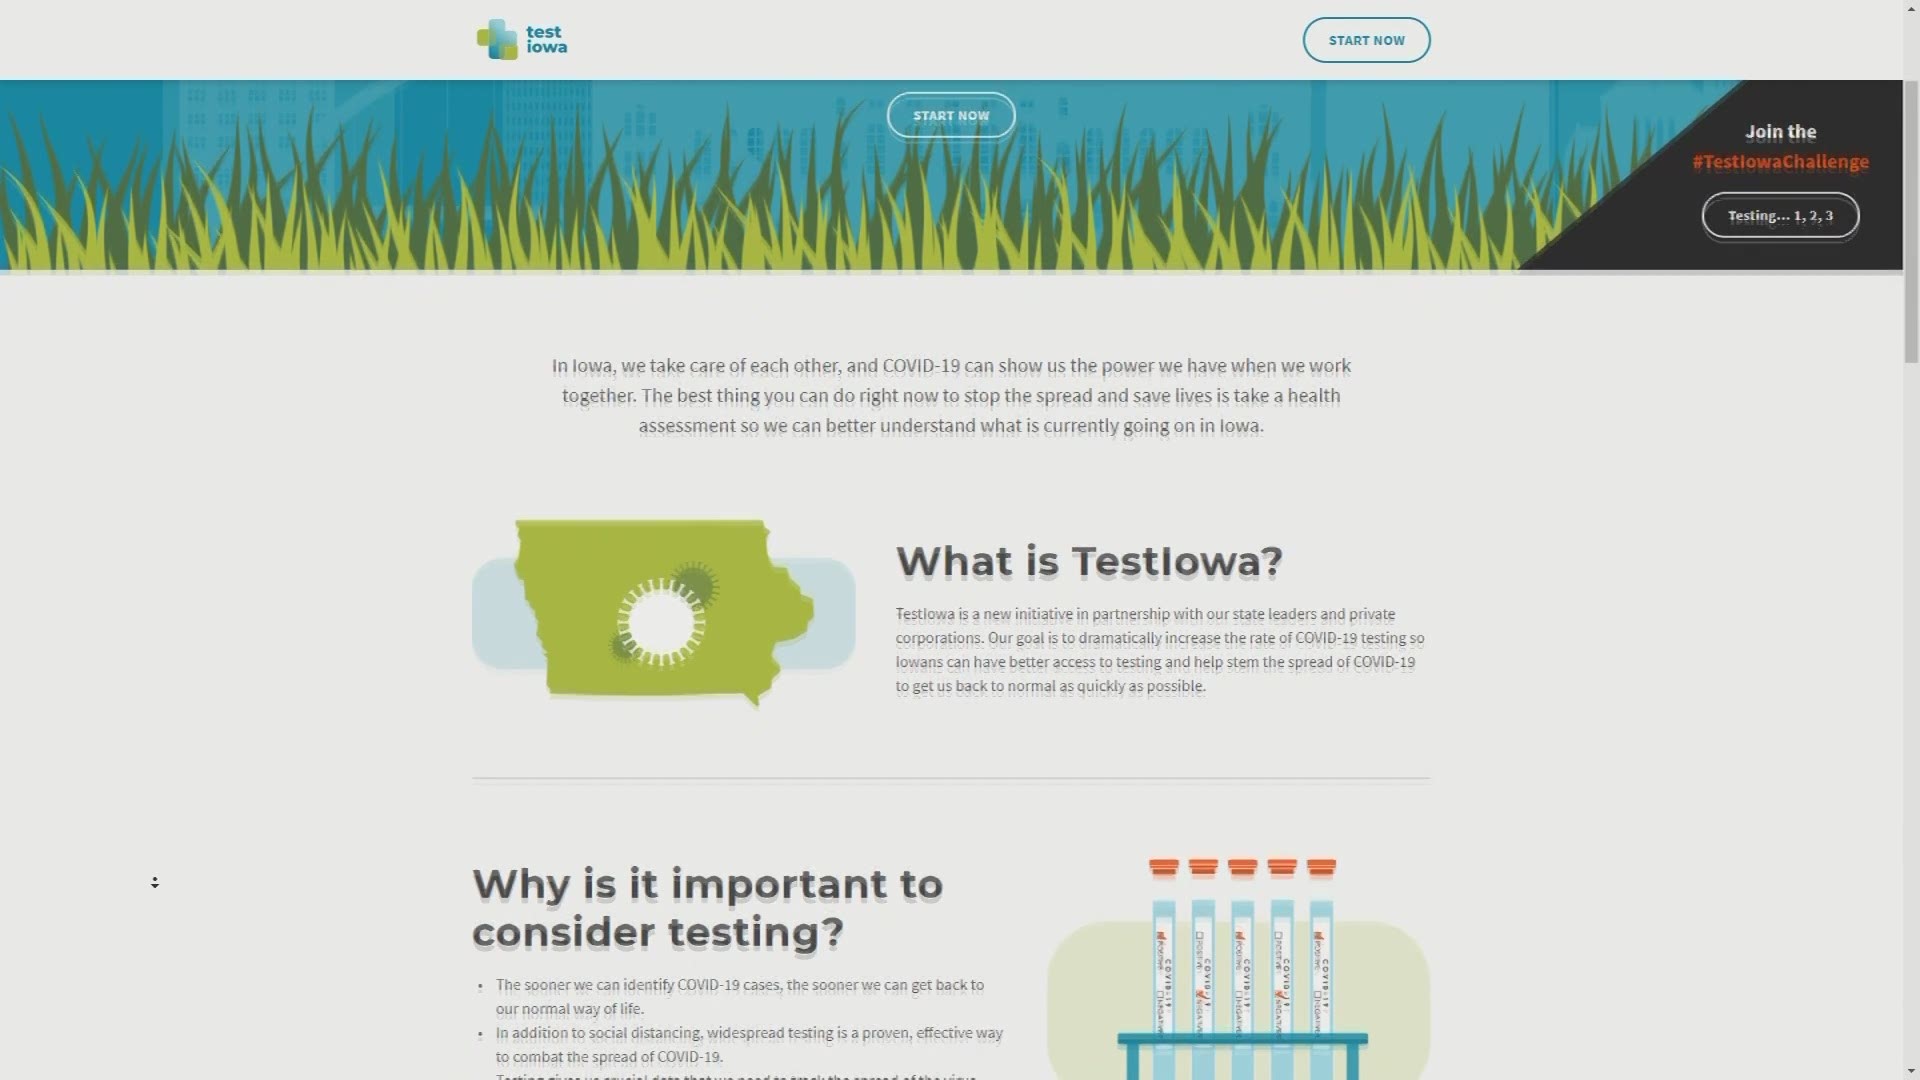 The website was launched to help in the effort to test more Iowans for COVID-19